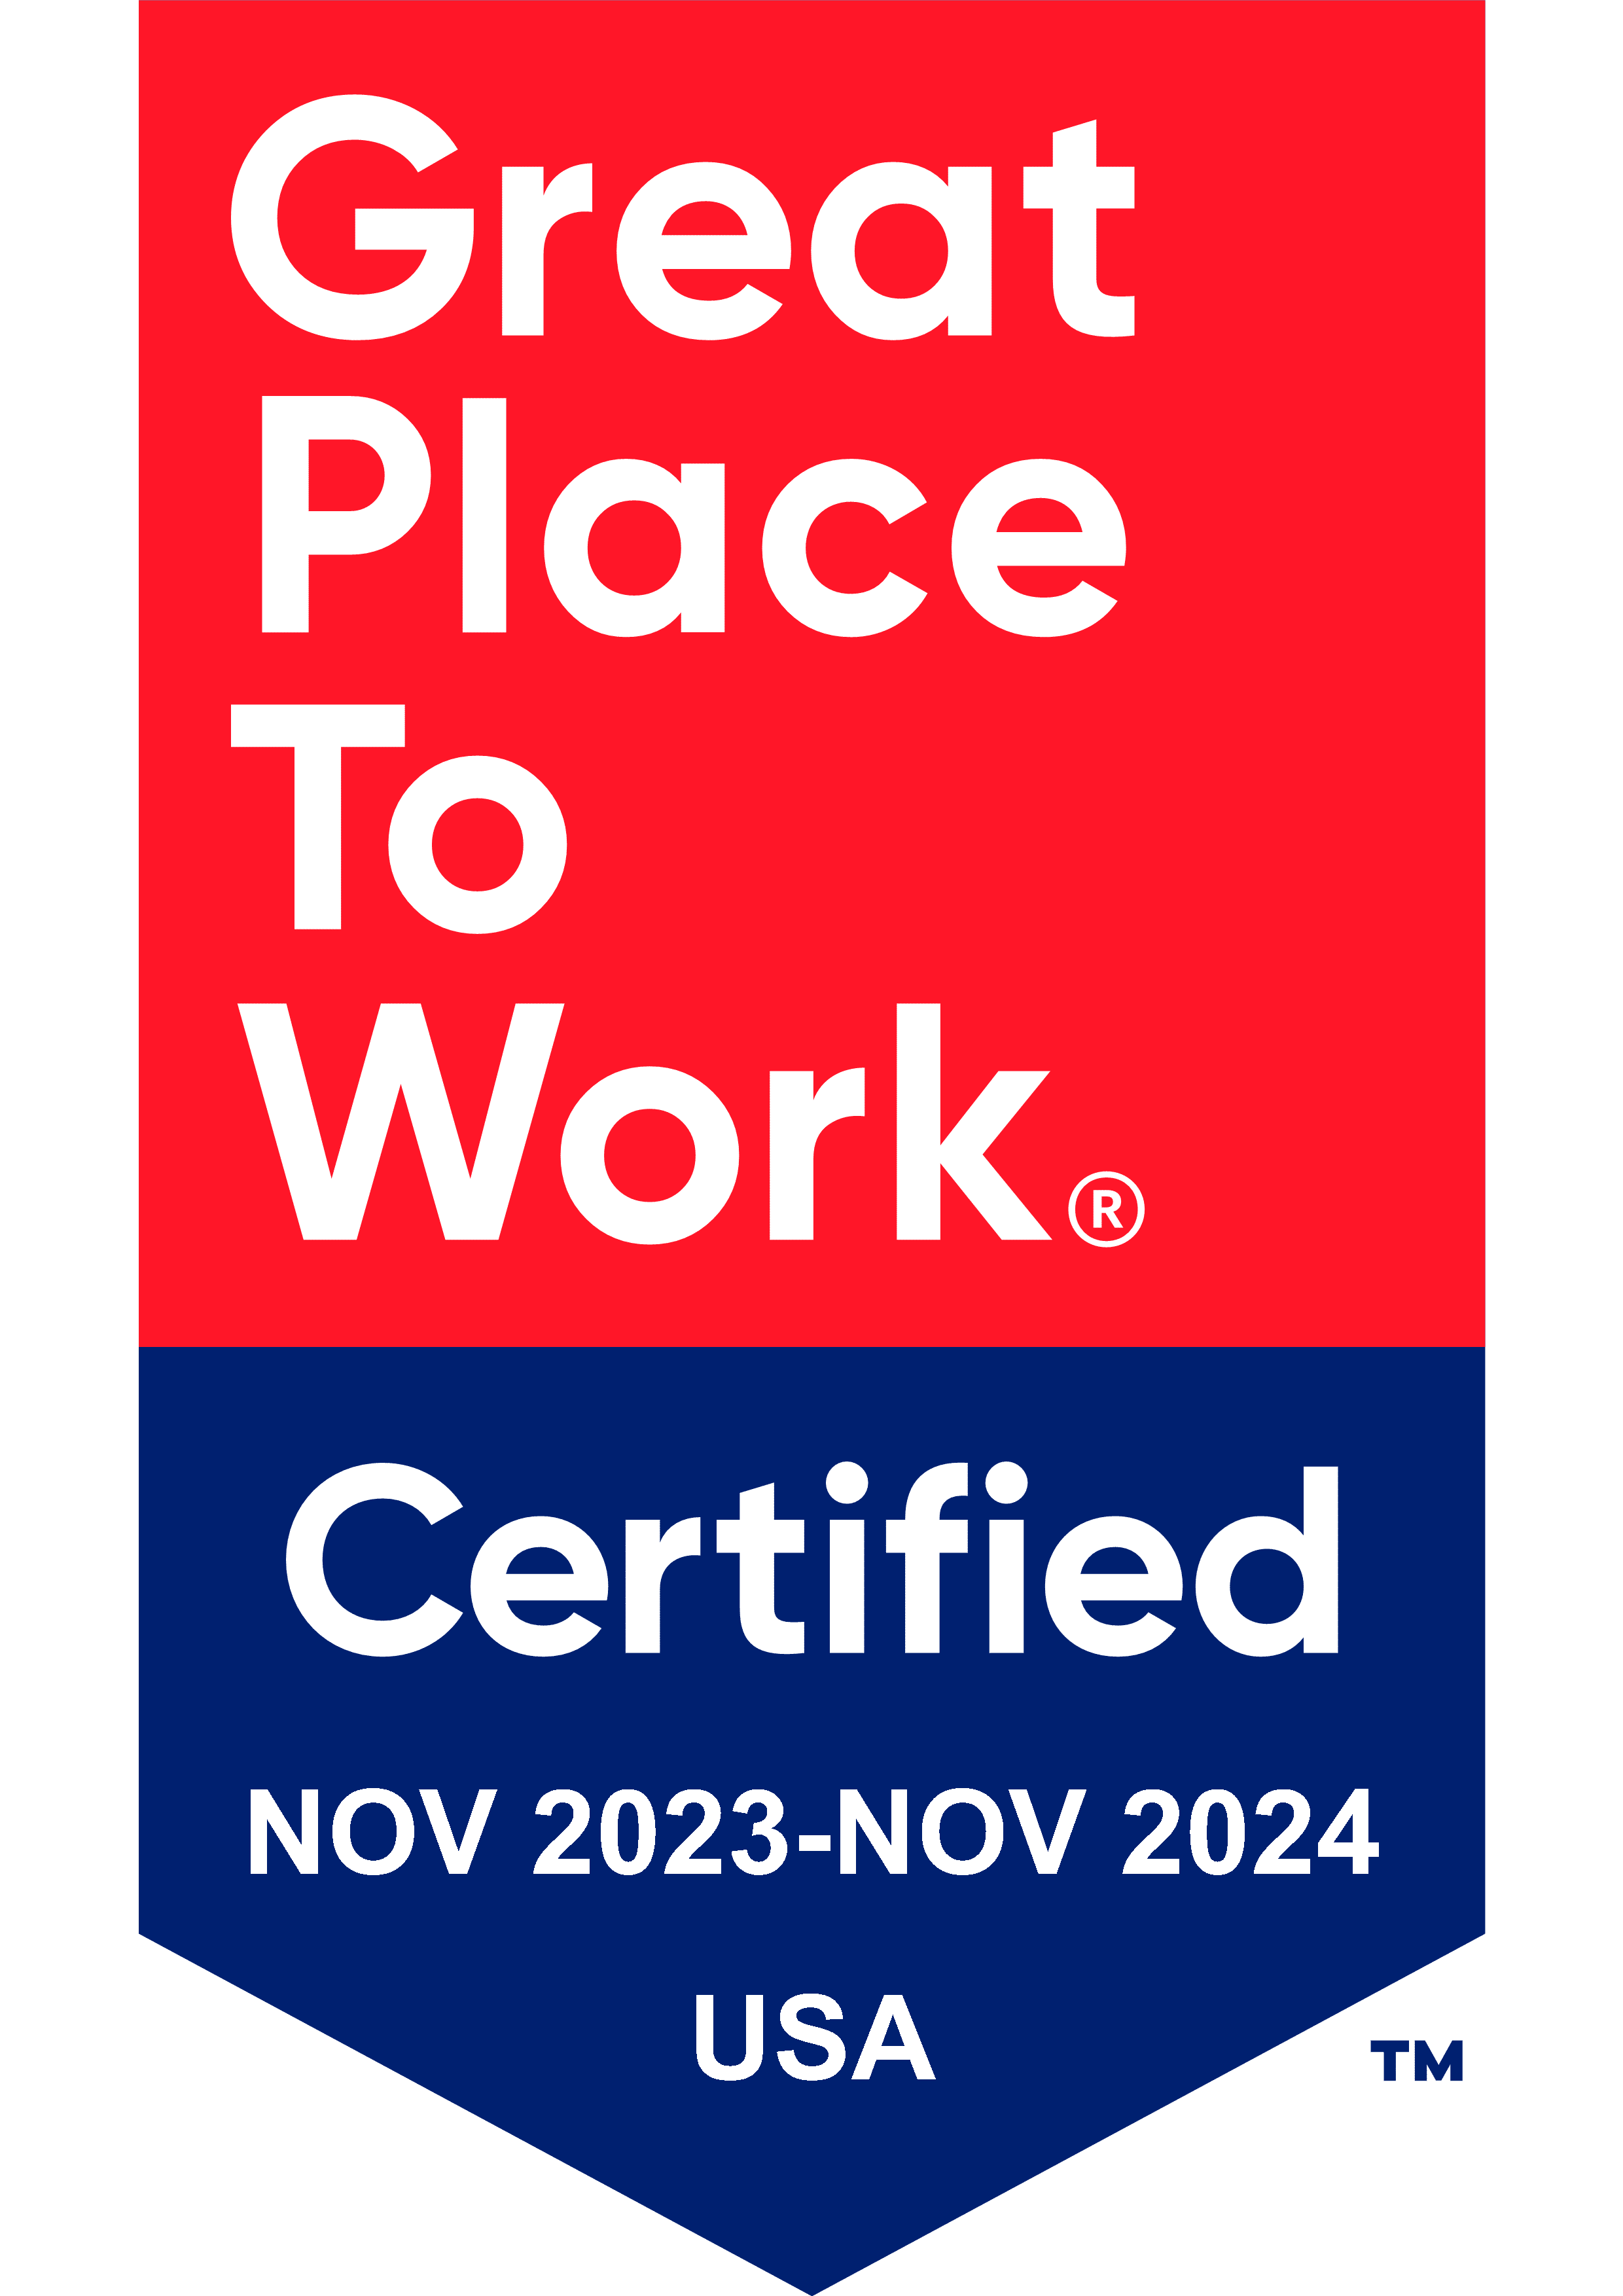 Great place to work certified US